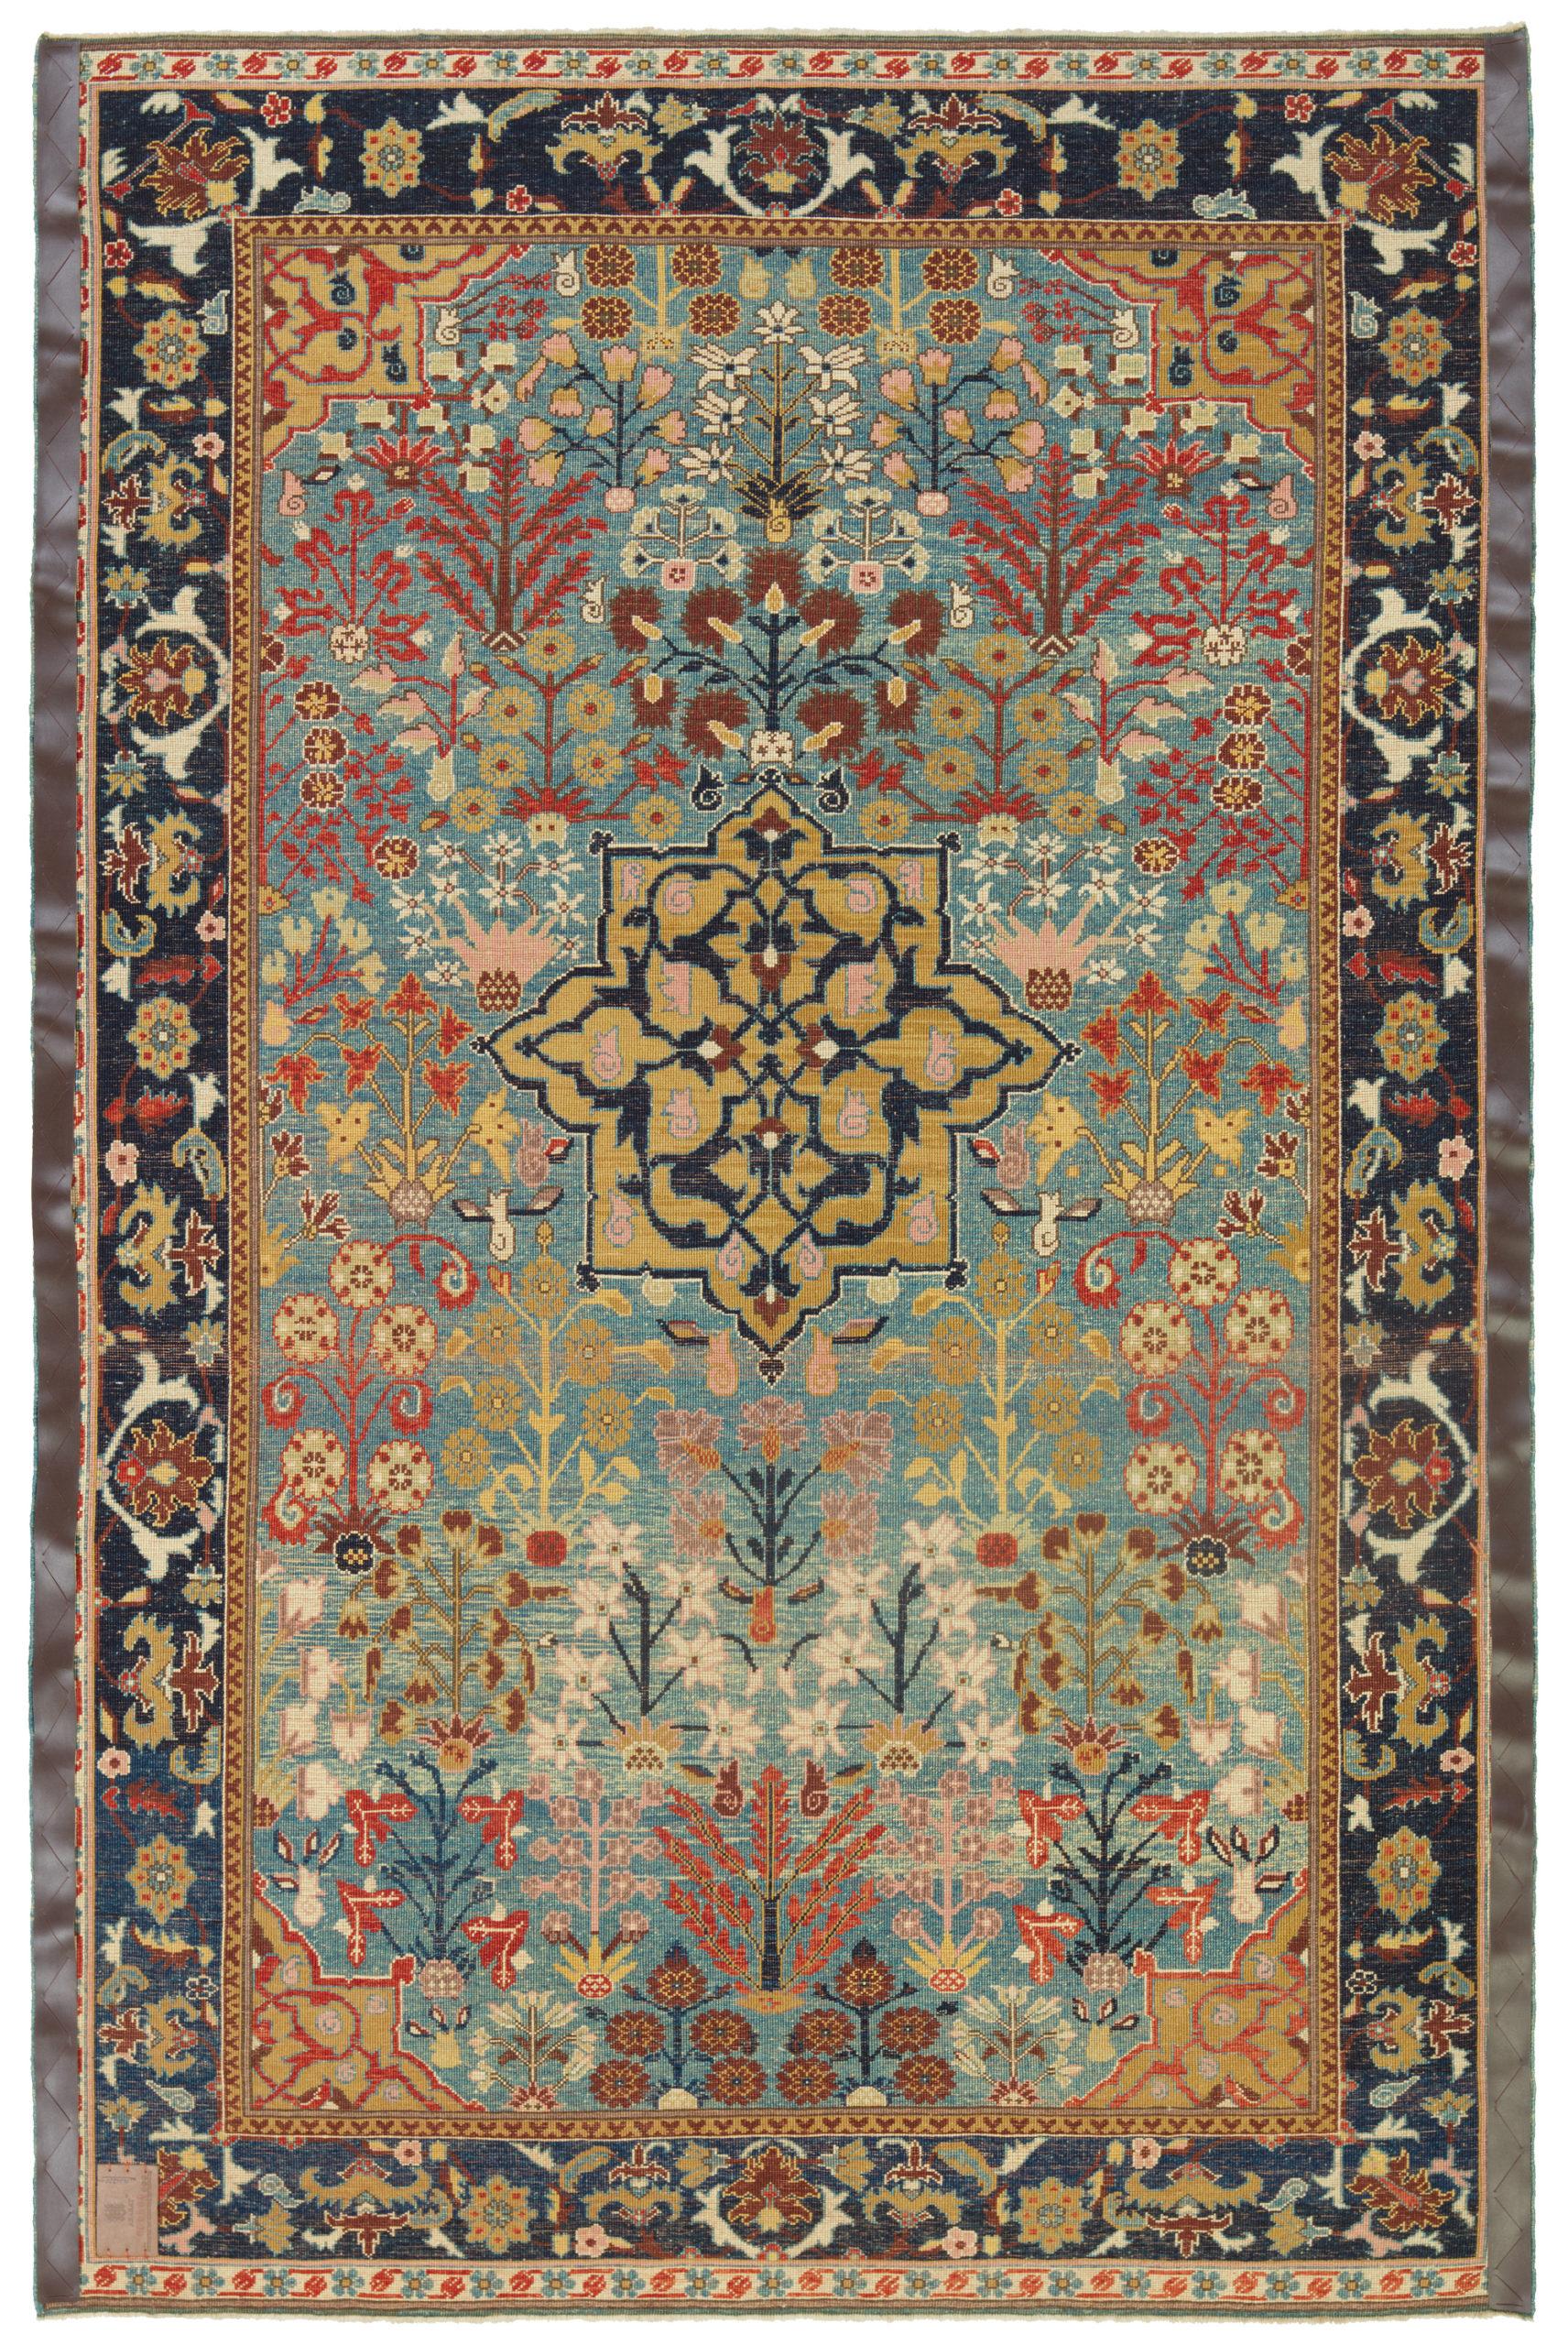 The design source of the carpet comes from the book How to Read – Islamic Carpets, Walter B. Denny, The Metropolitan Museum of Art, New York 2014 fig.18. This is a vase-technique with a stellate central medallion carpet design 17th century from